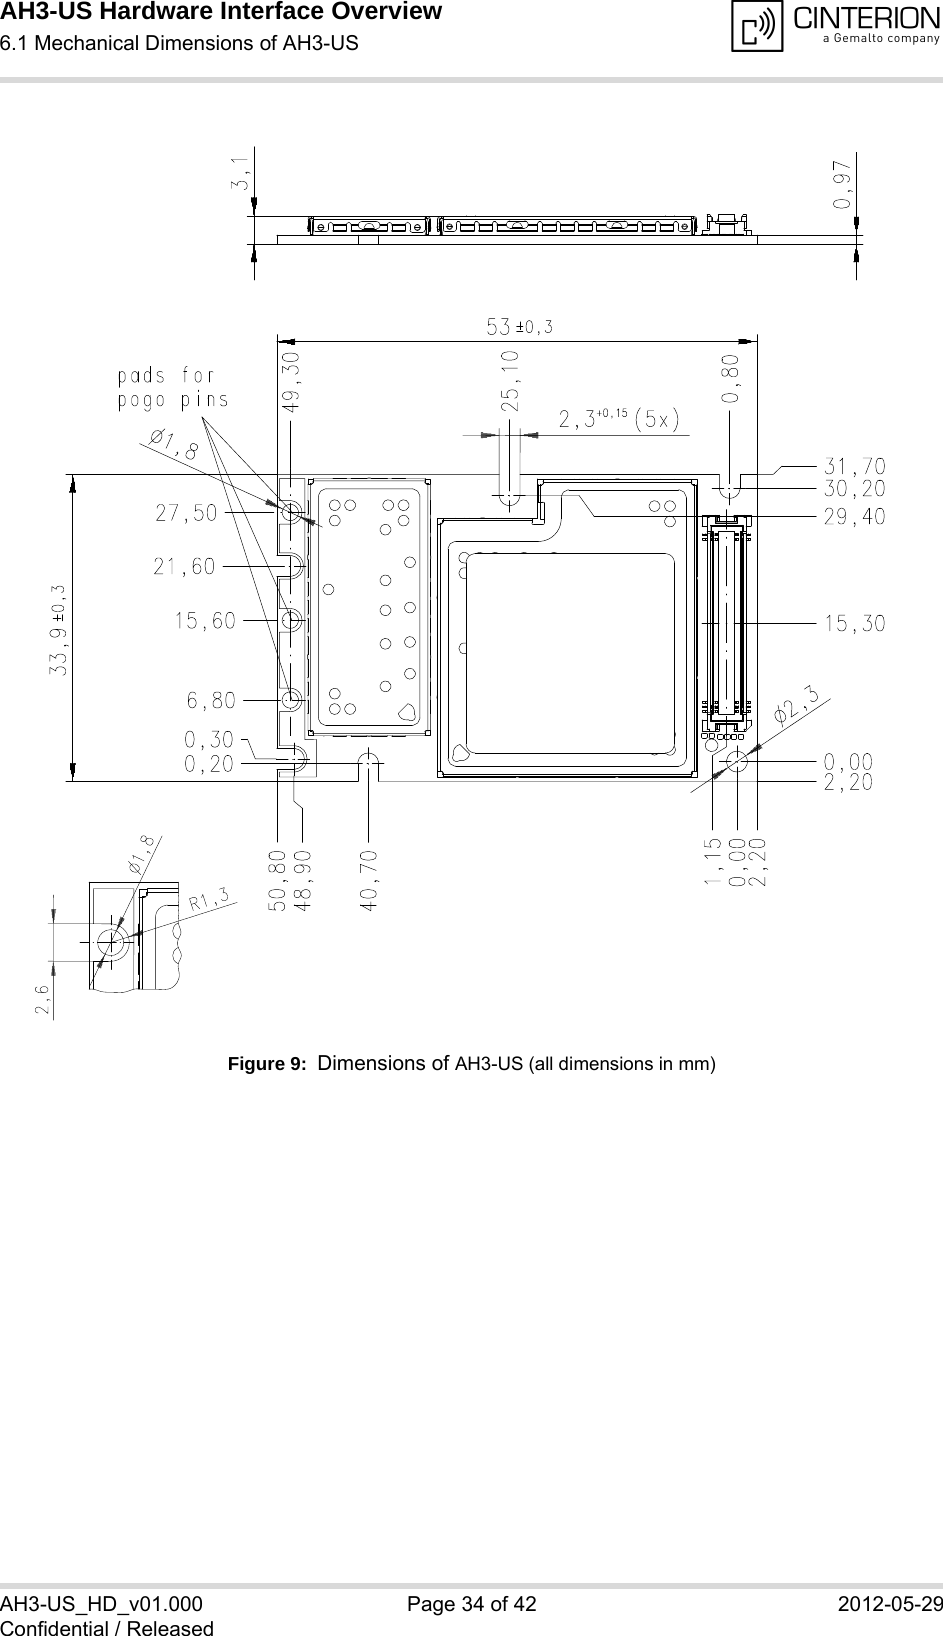 AH3-US Hardware Interface Overview6.1 Mechanical Dimensions of AH3-US38AH3-US_HD_v01.000 Page 34 of 42 2012-05-29Confidential / ReleasedFigure 9:  Dimensions of AH3-US (all dimensions in mm)